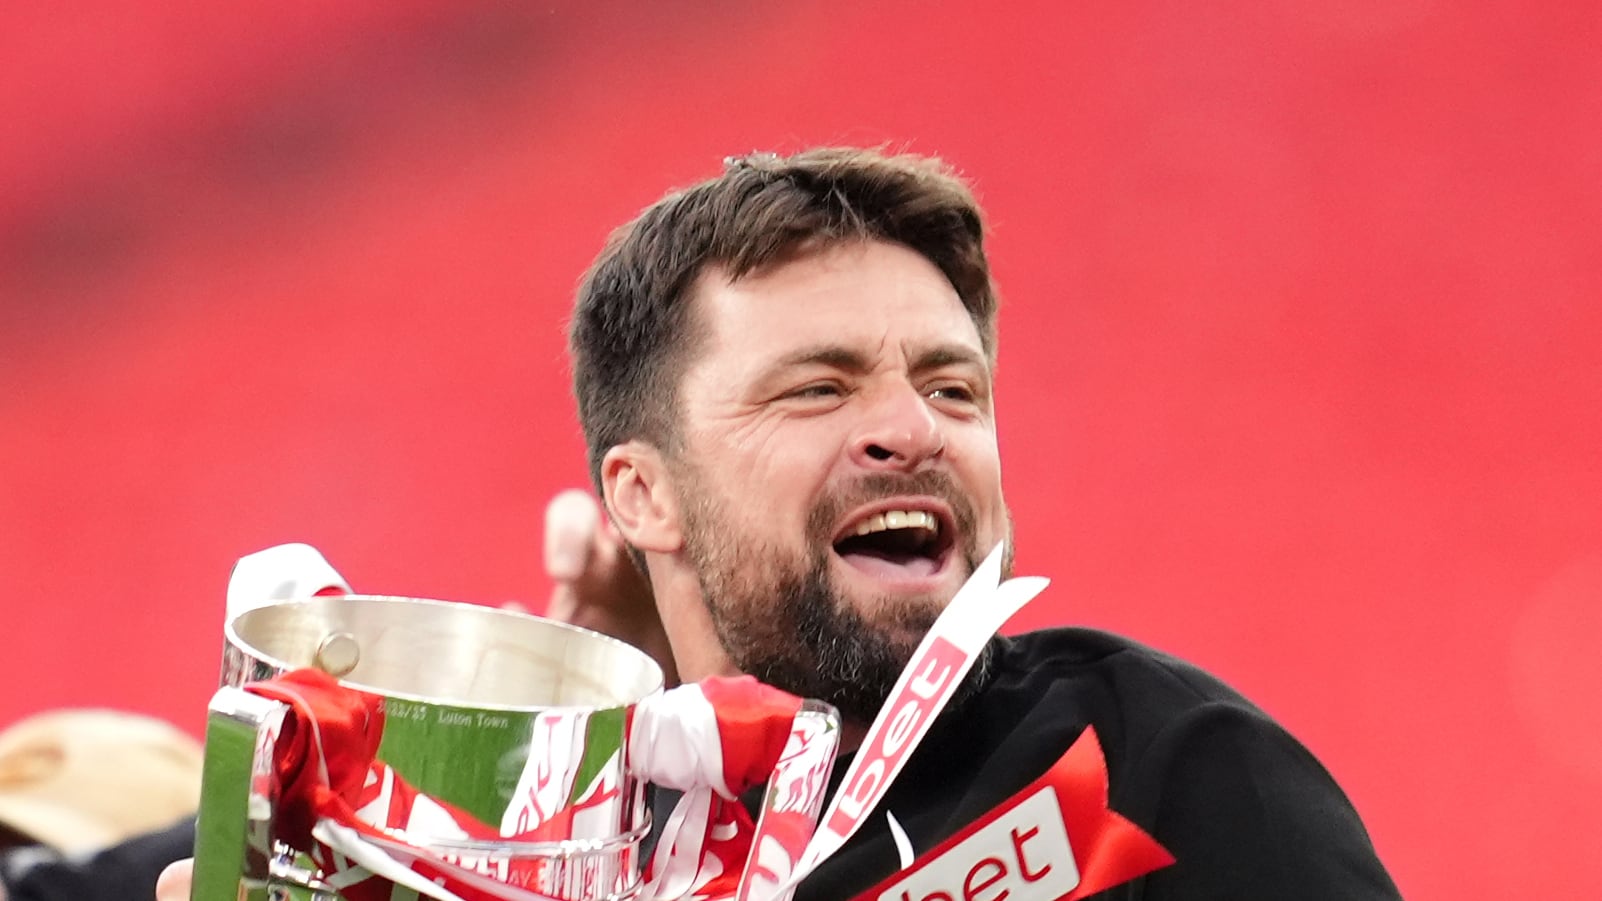 Southampton manager Russell Martin celebrates his side’s promotion after beating Leeds in the play-off final